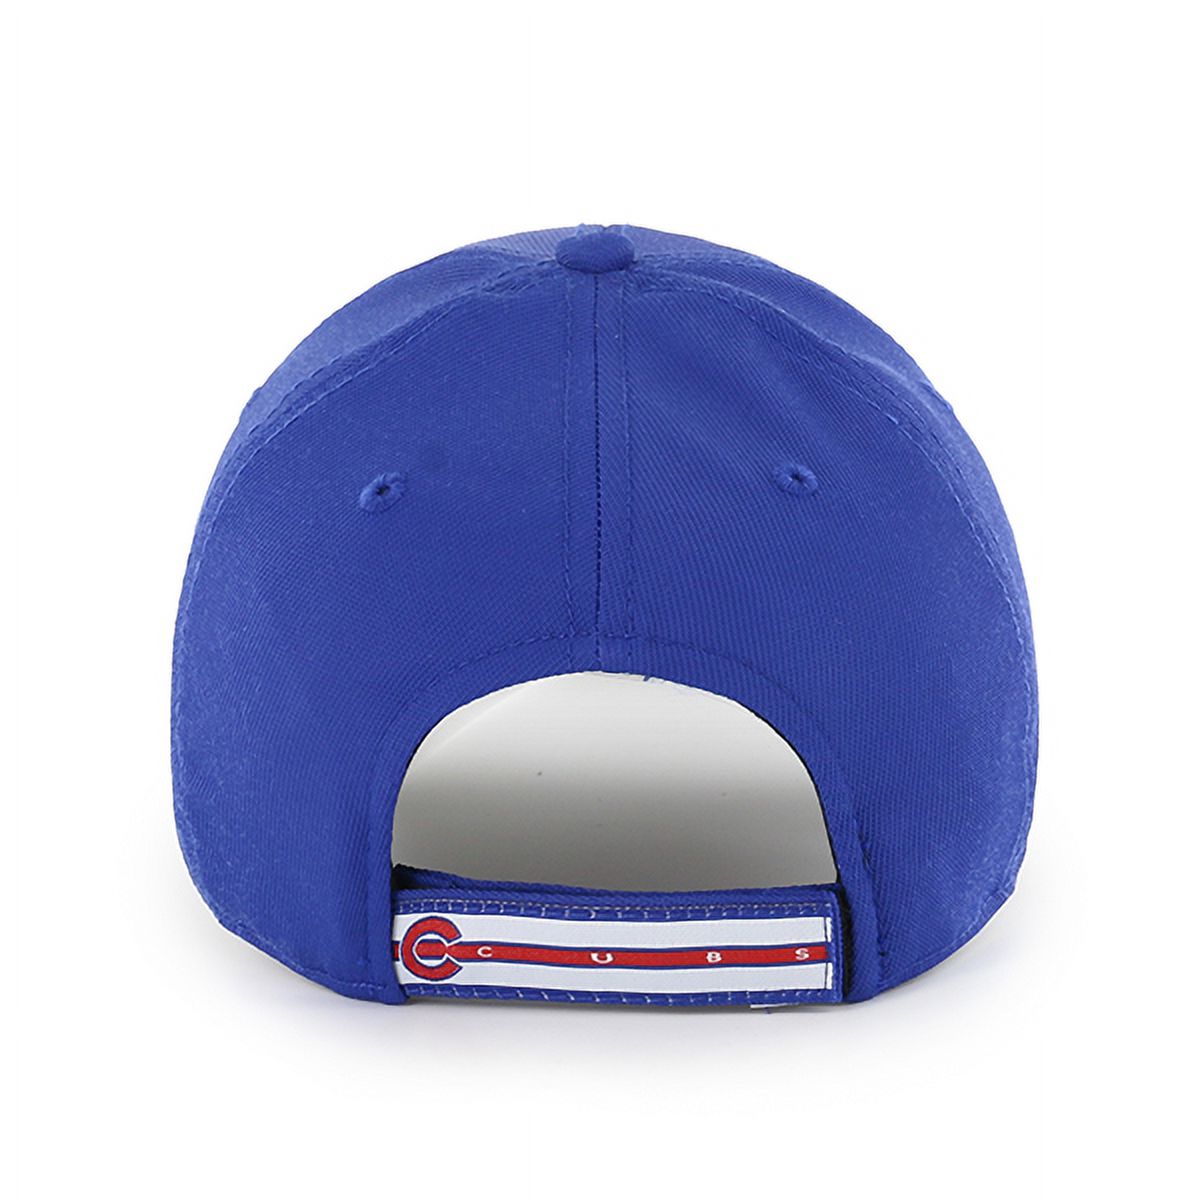 Fan Favorite - MLB Forest Cap, Chicago Cubs - image 2 of 2